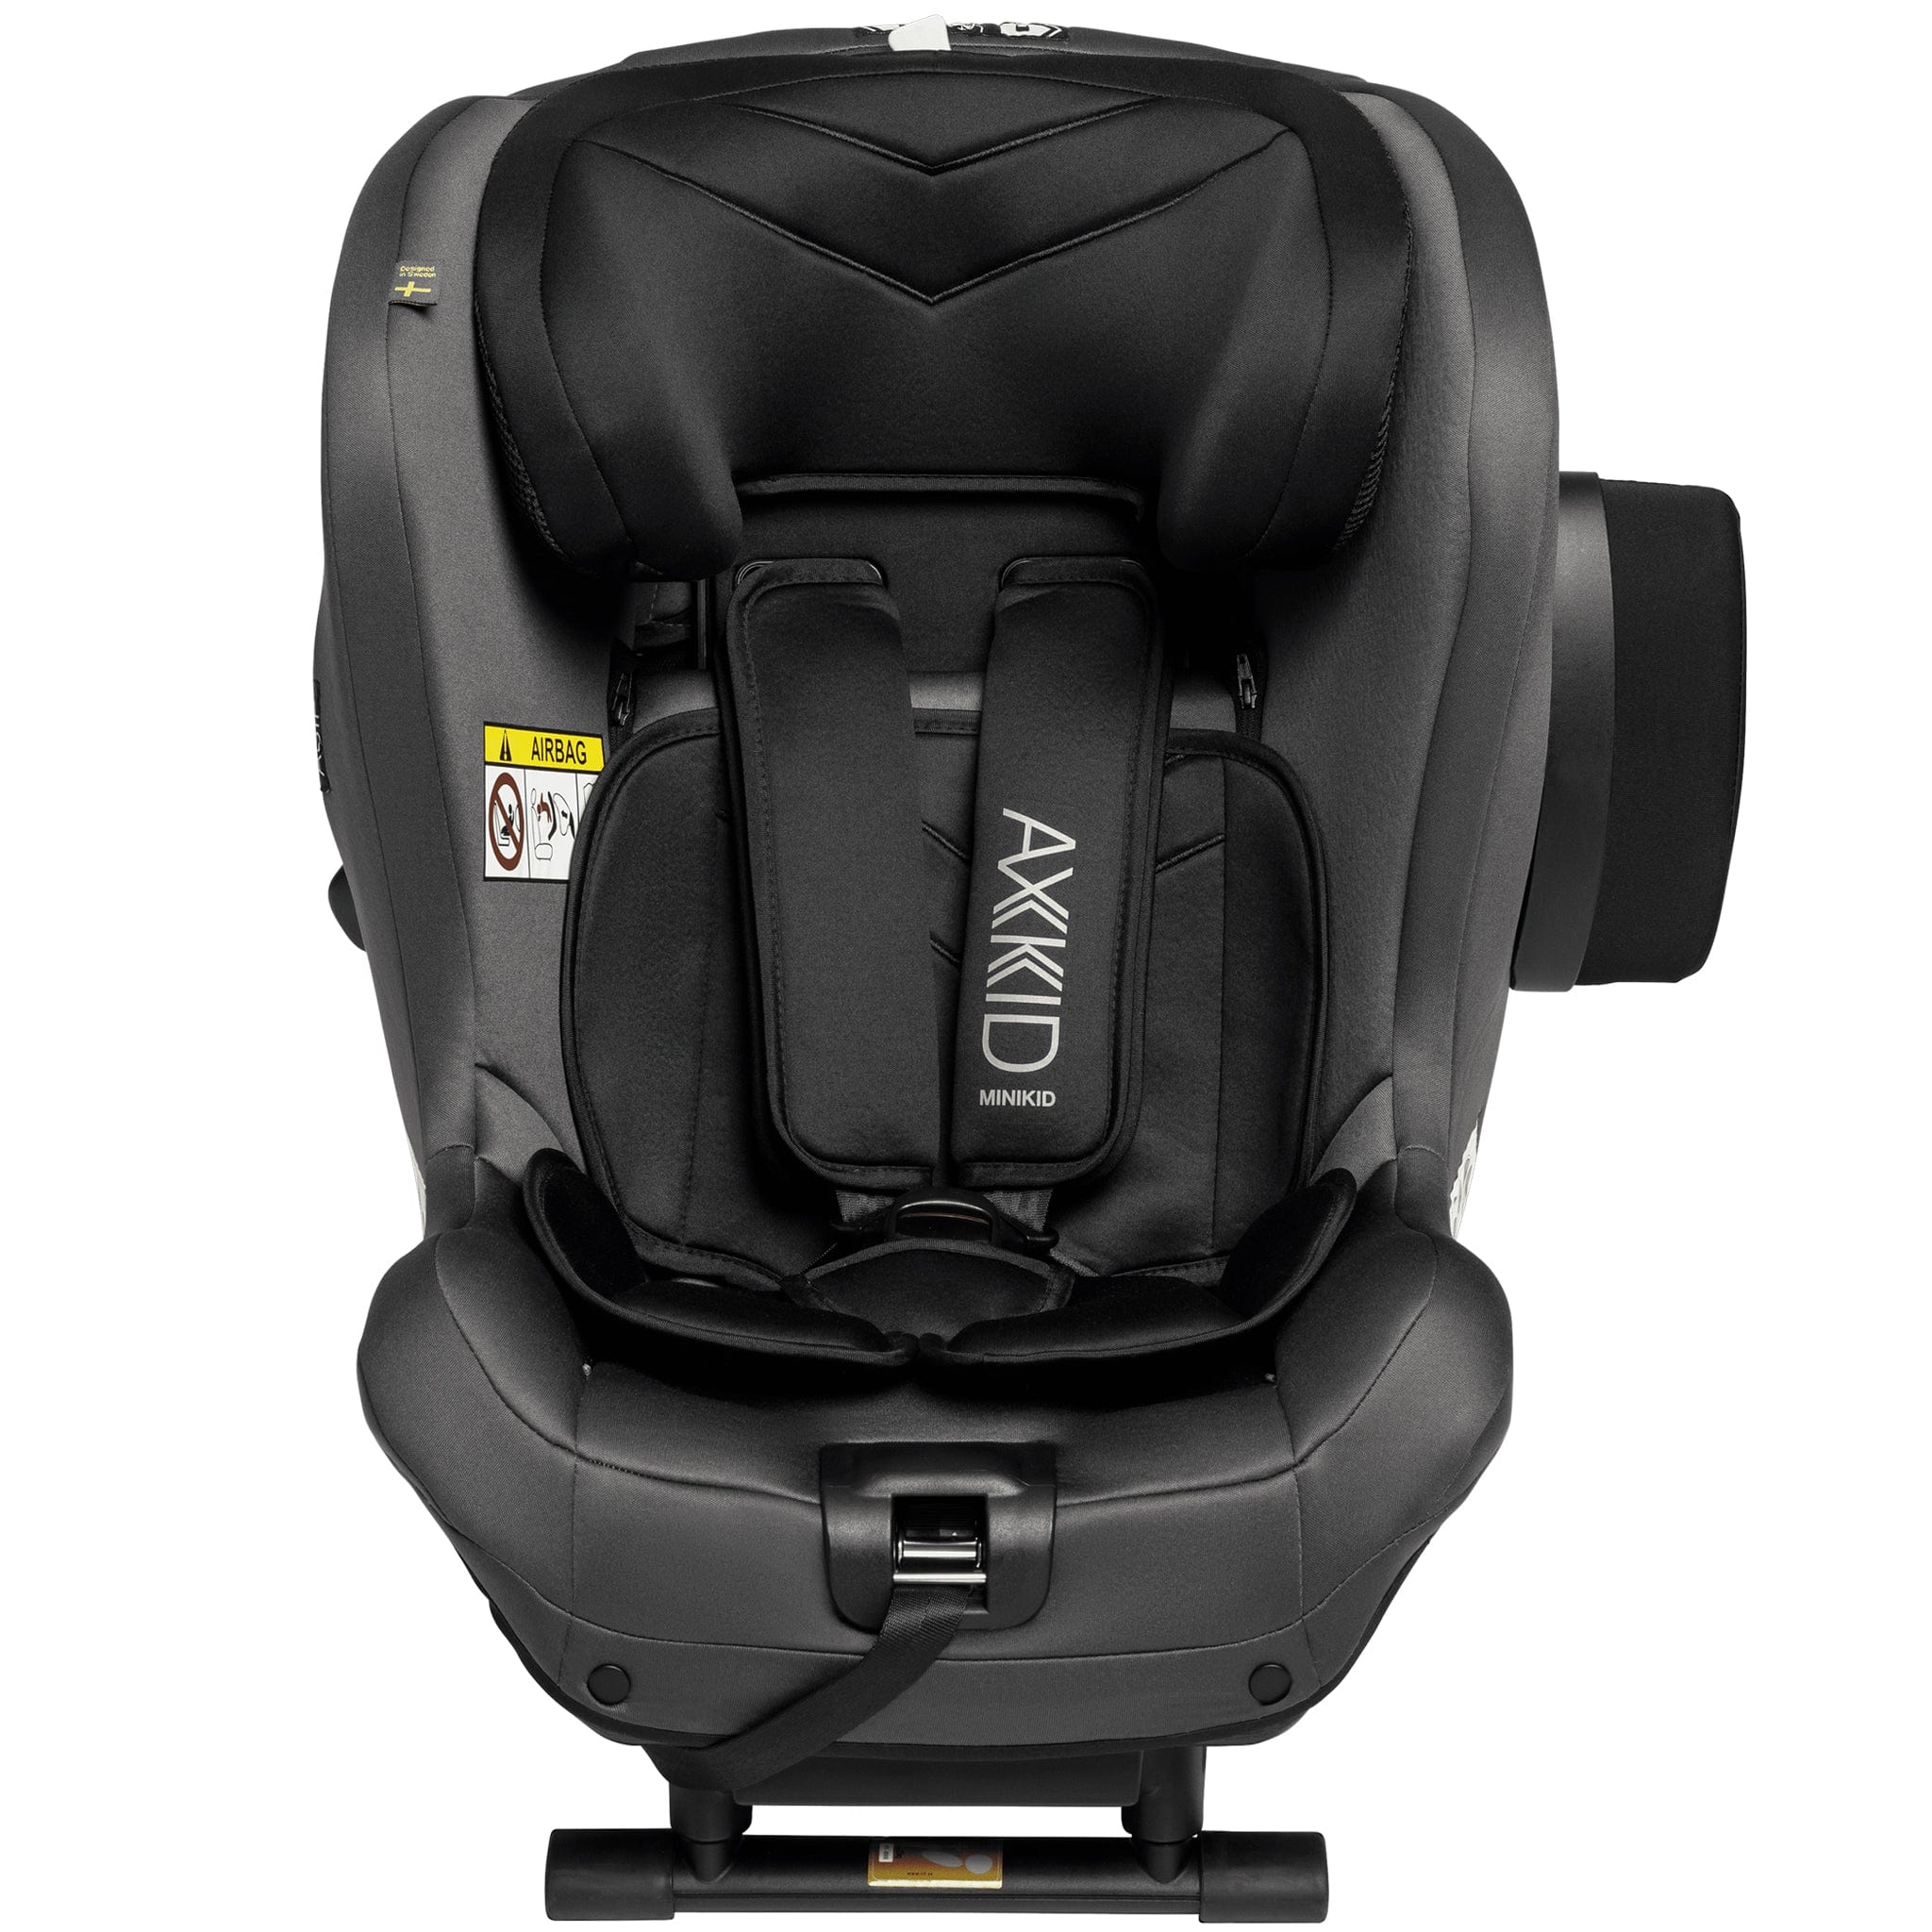 Axkid Minikid 2 - Granite With Free Seat Protector Extended Rear Facing Car Seats 10534-GRA 7350057585887